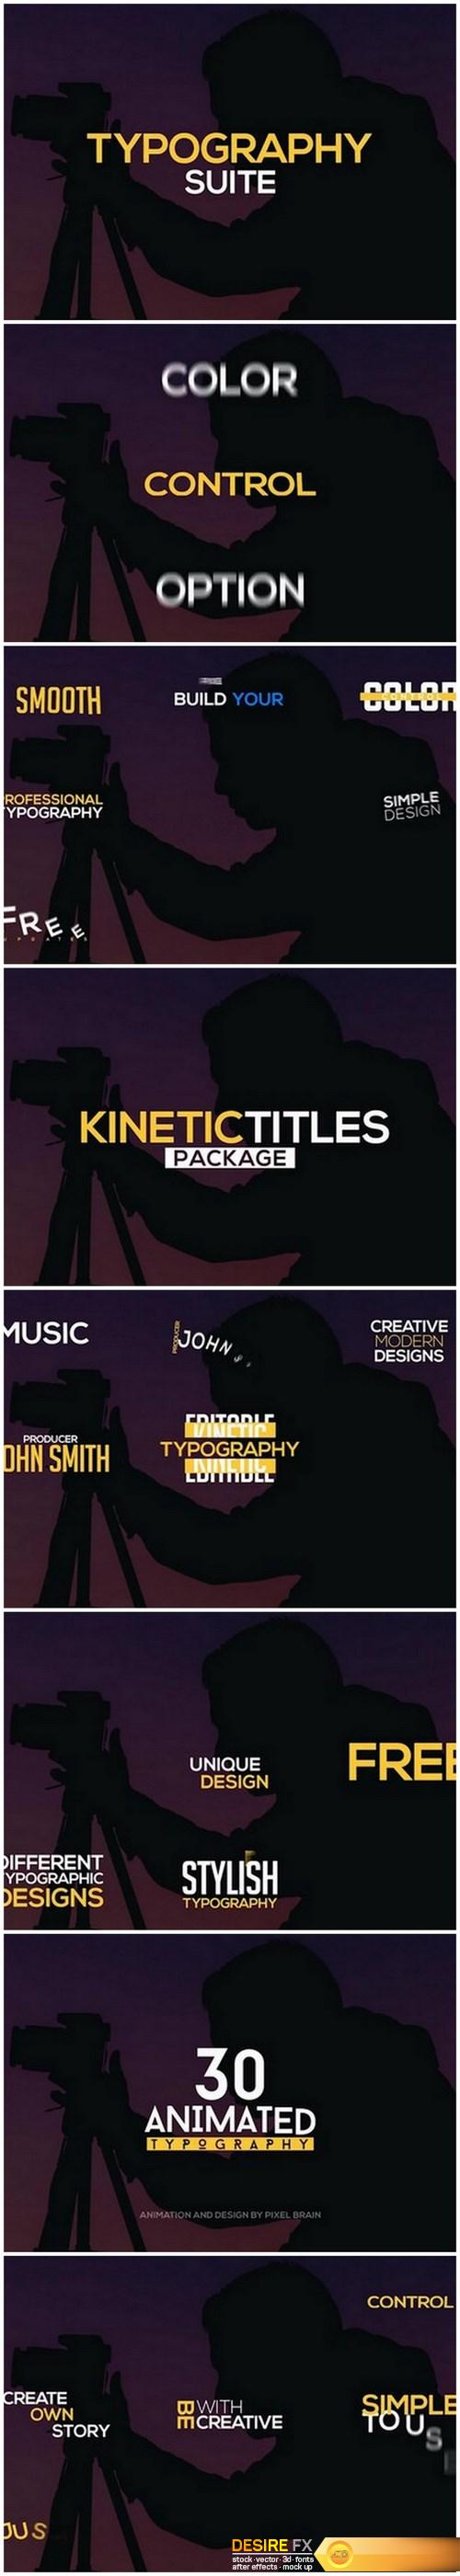 Videohive 19779026 kinetic titles